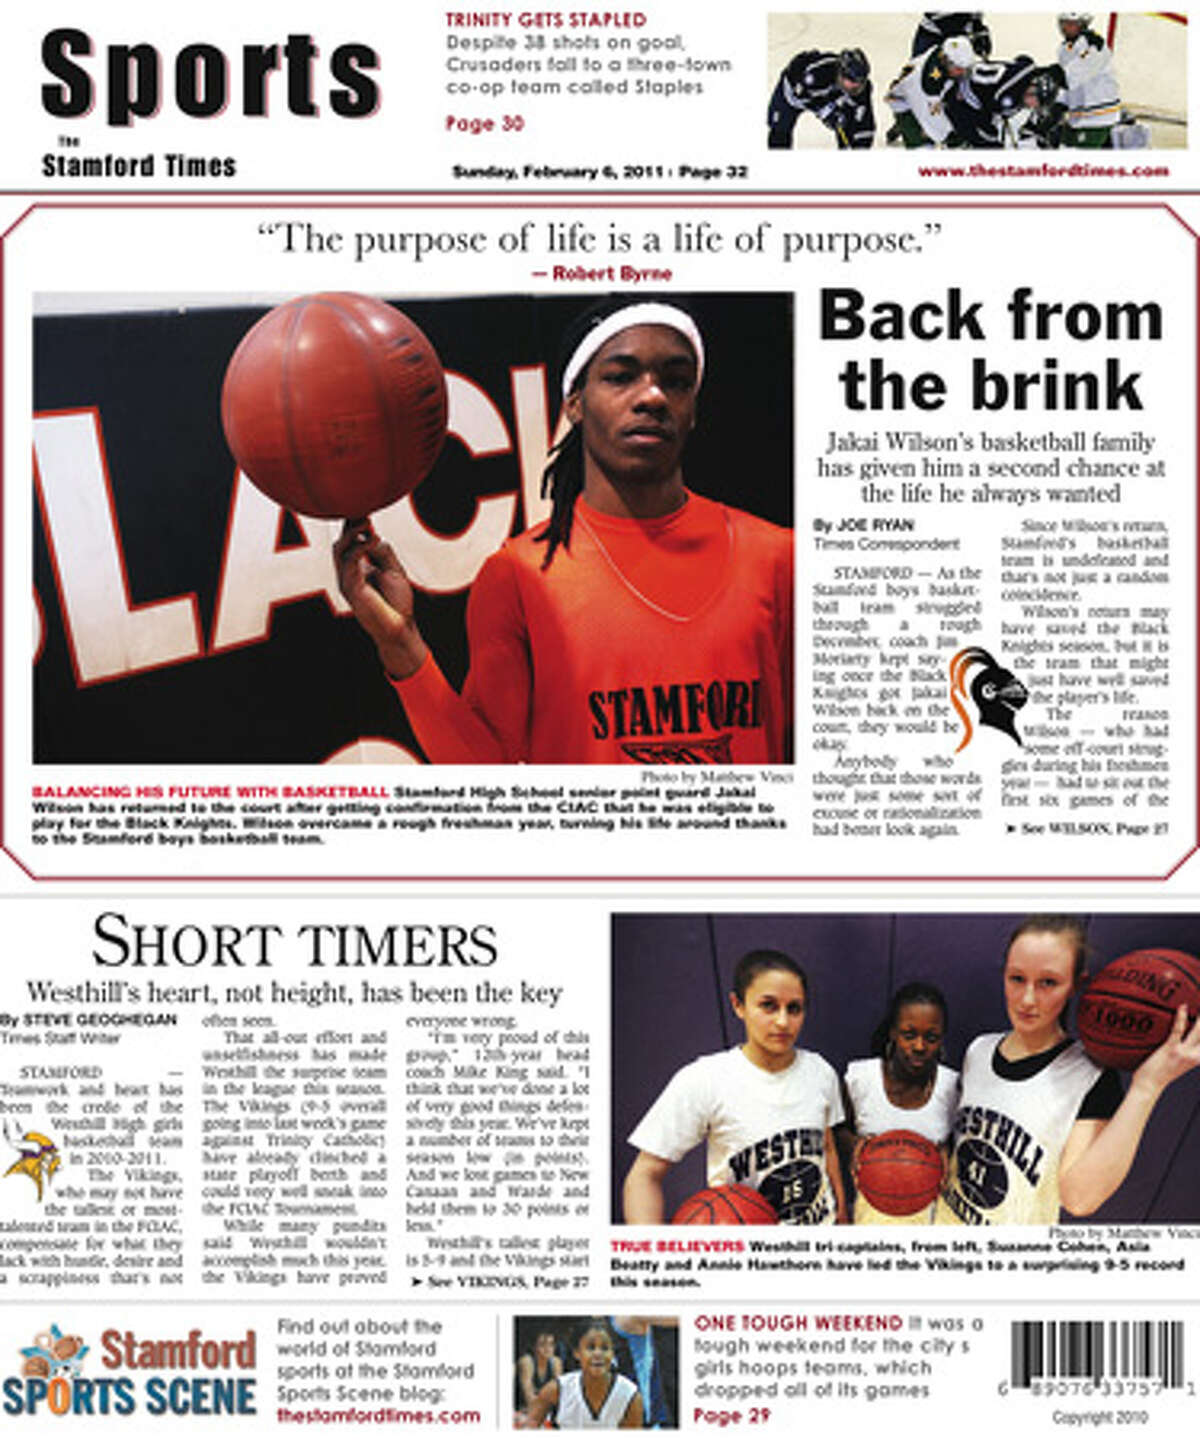 This Week In The Stamford Times (Feb. 6, 2011 edition)